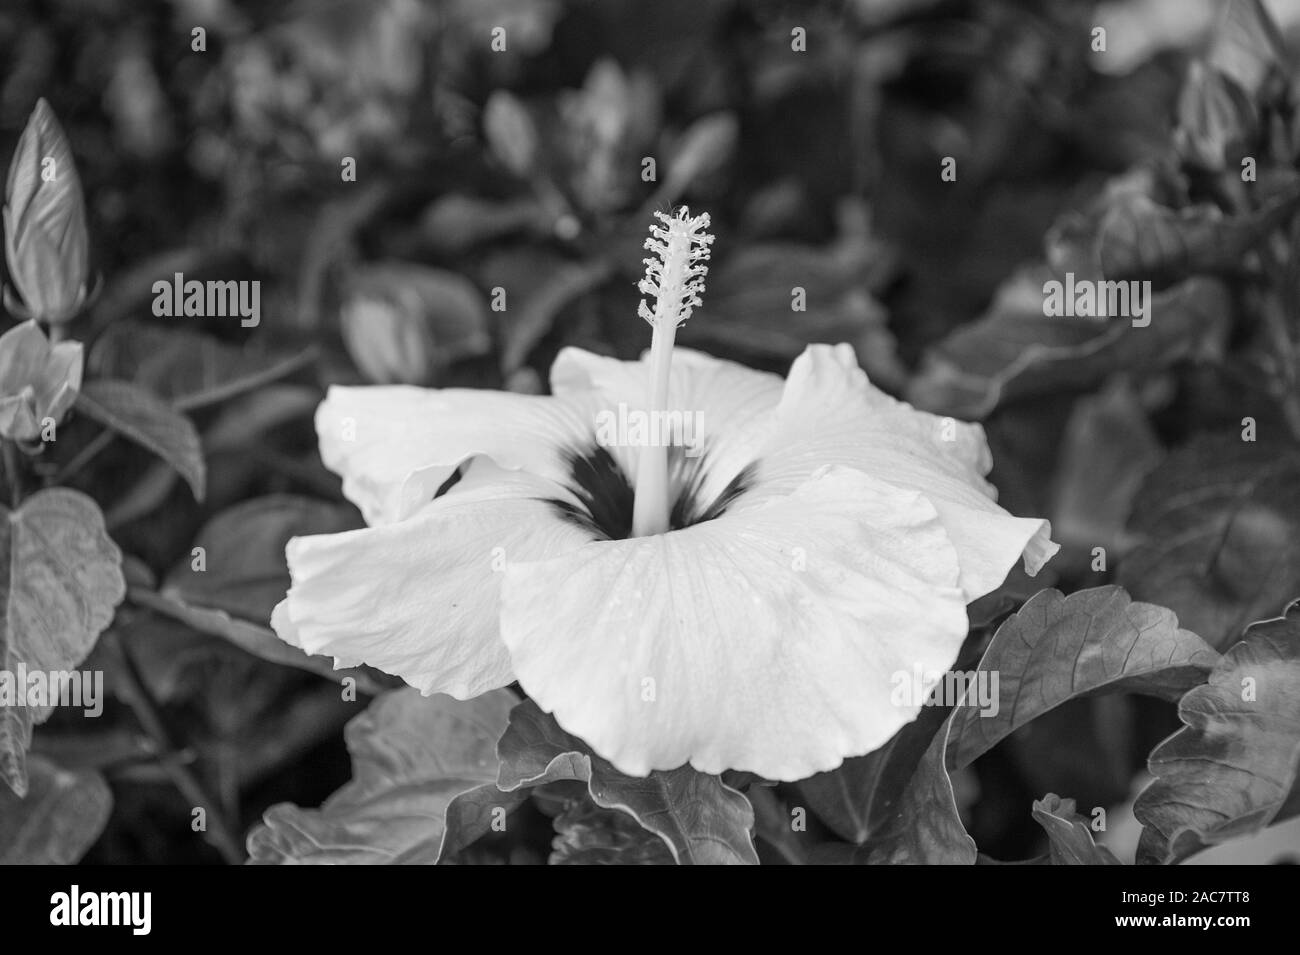 Hardy hibiscus rose of sharon and tropical hibiscus. Exotic plants and flowers. Gorgeous hibiscus flower close up. Flowers large conspicuous trumpet shaped with five or more petals. Yellow hibiscus. Stock Photo